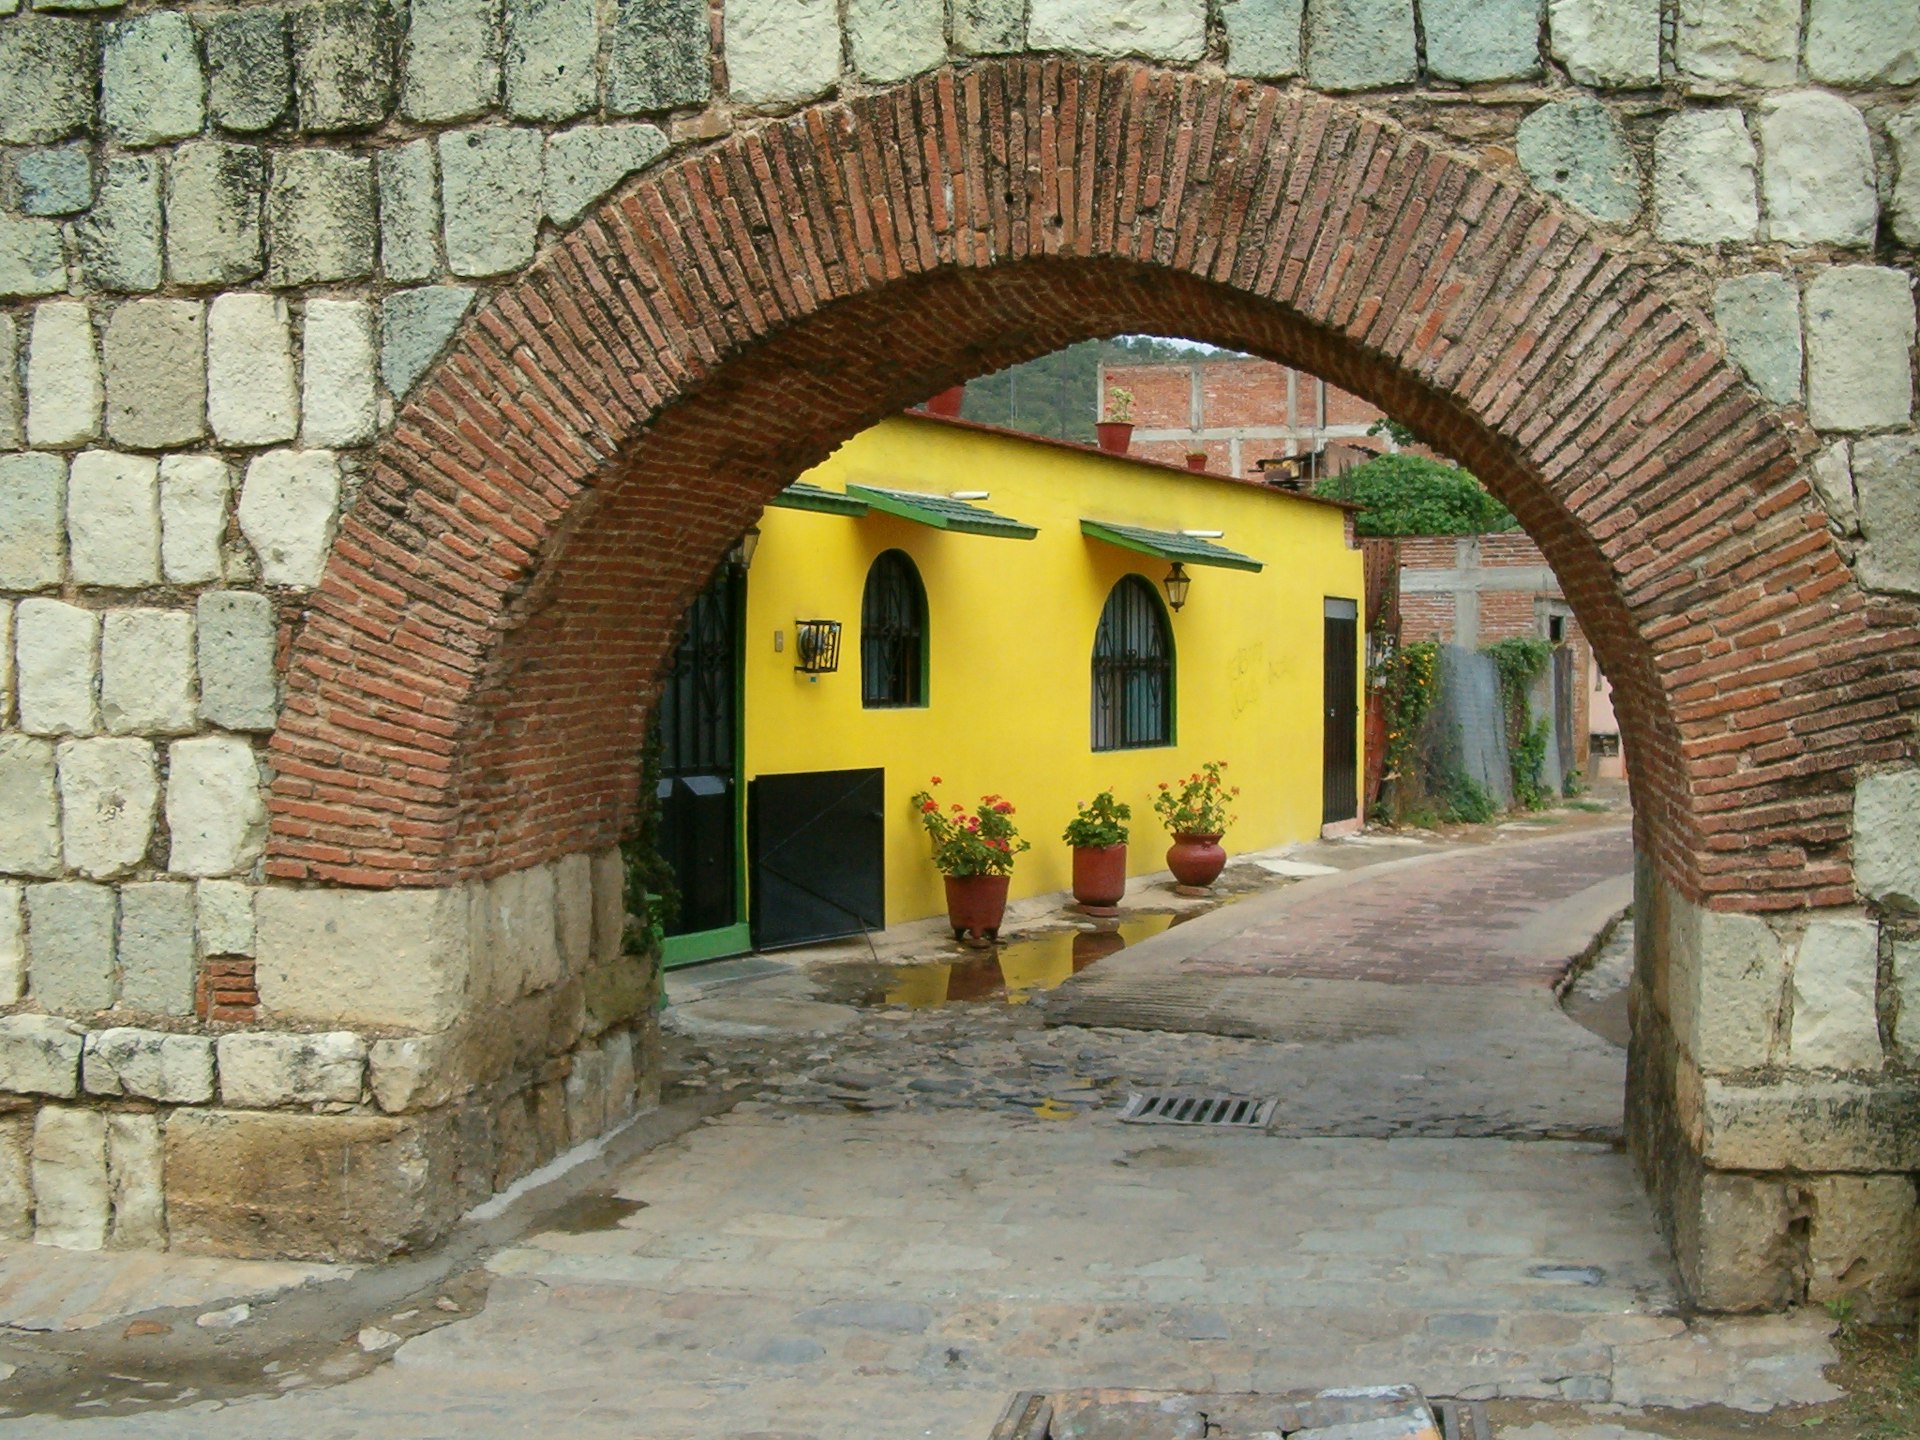 Yellow house behind an arch in the Xochimilco Aqueduct in Oaxaca City, Mexico. The wall was built of Oaxaca's typical volcanic green stone.